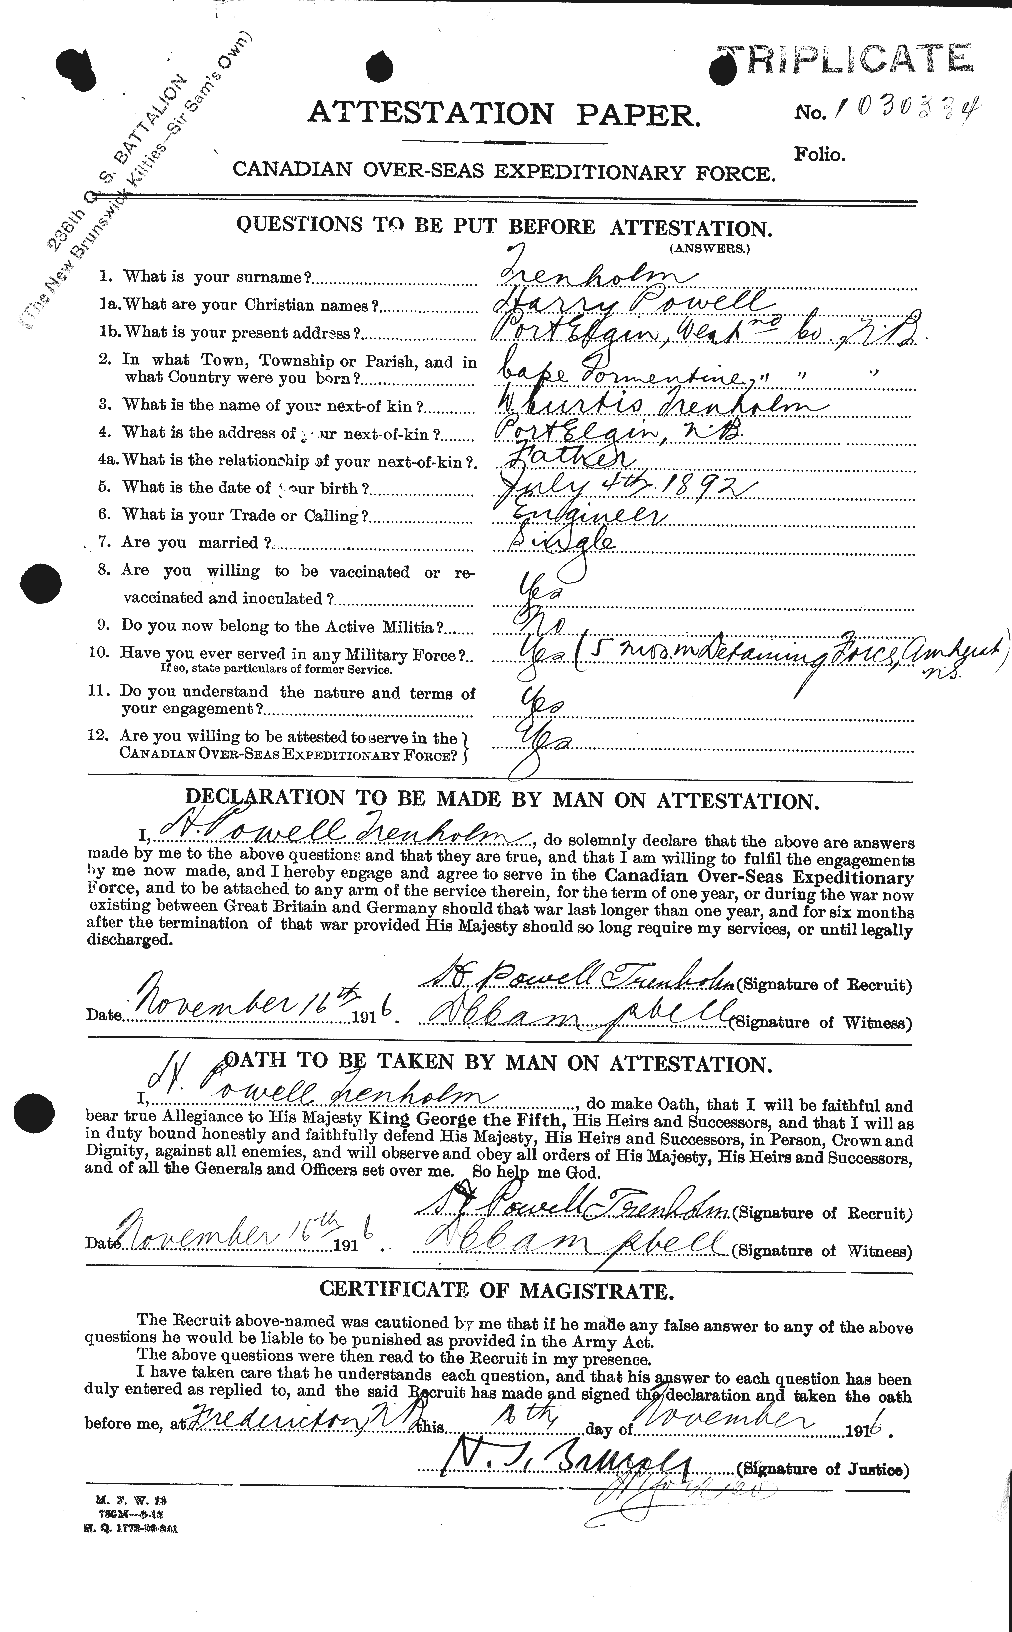 Personnel Records of the First World War - CEF 638459a